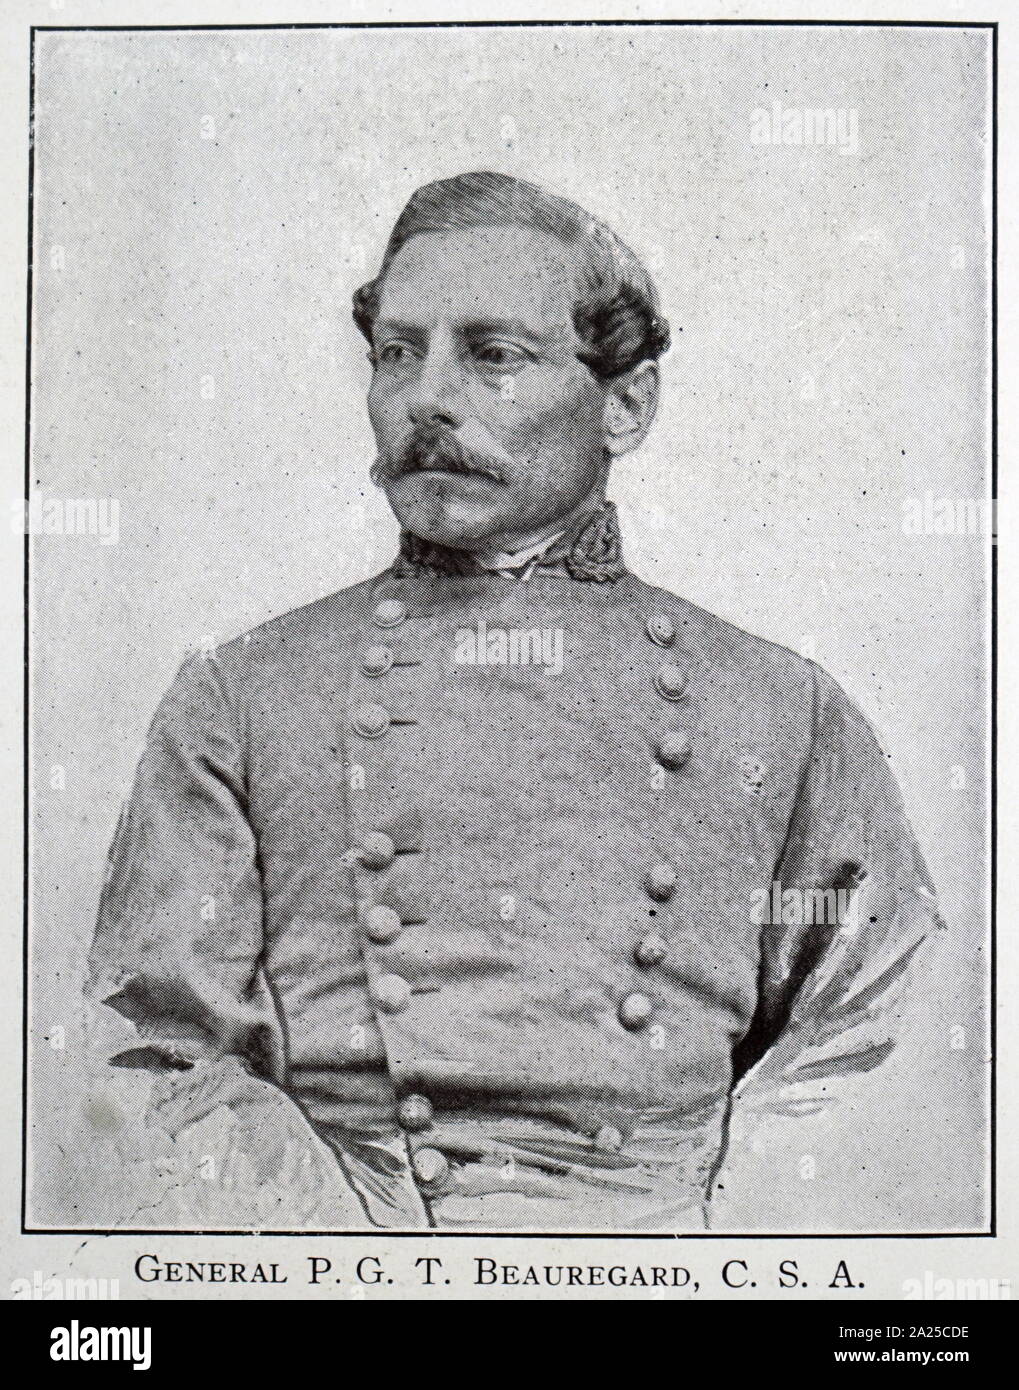 Pierre Gustave Toutant-Beauregard (May 28, 1818 – February 20, 1893) was an American military officer who was the first prominent general of the Confederate States Army during the American Civil War. Stock Photo